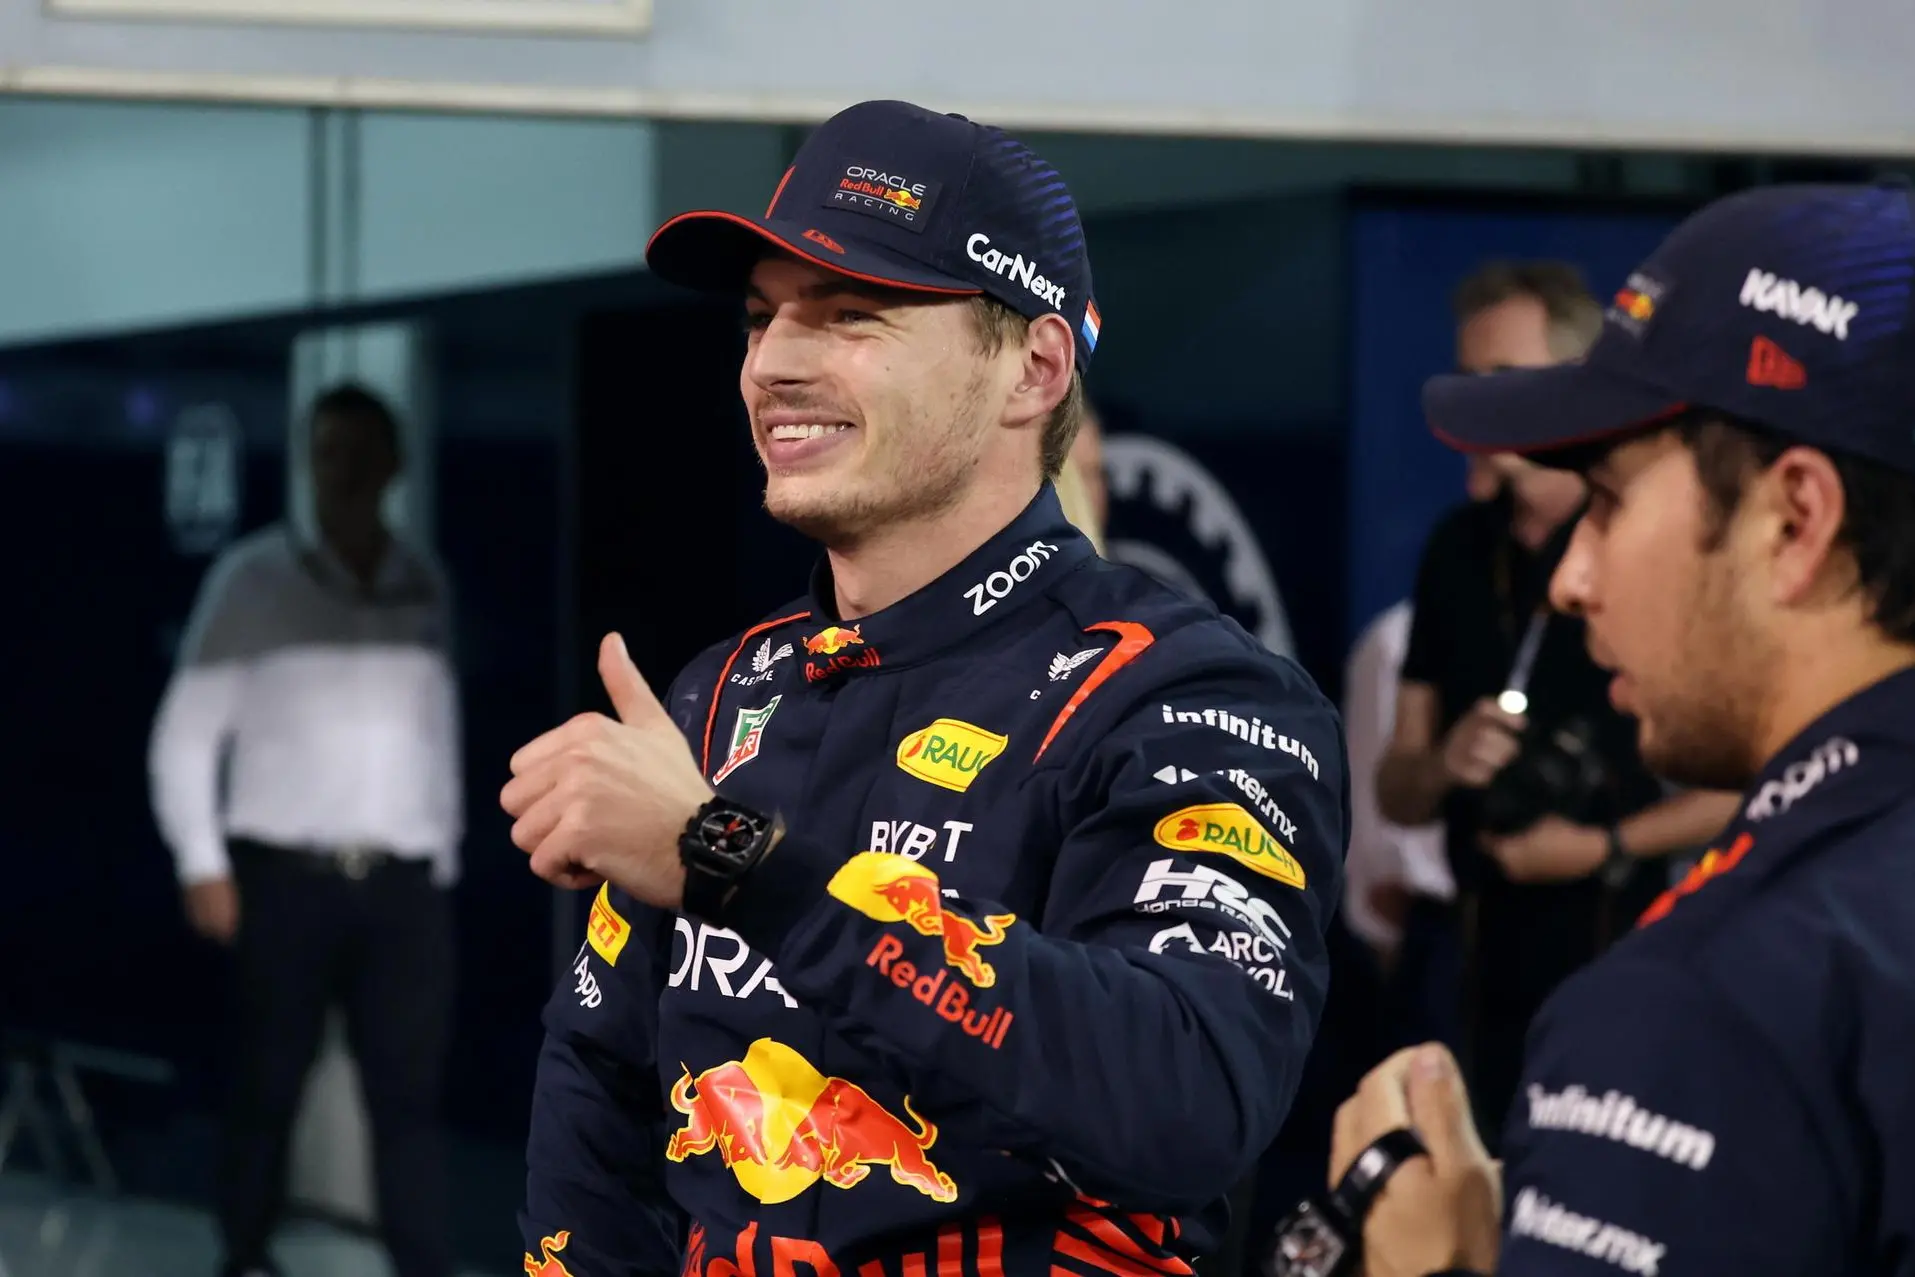 epa10503186 Dutch Formula One driver Max Verstappen of Red Bull Racing (C), who won the pole position, reacts after taking the pole position at the end of the qualifying session for Formula One Grand Prix of Bahrain at the Bahrain International Circuit in Sakhir, Bahrain, 04 March 2023. The Formula One Grand Prix of Bahrain takes place on 05 March. EPA/Ali Haider